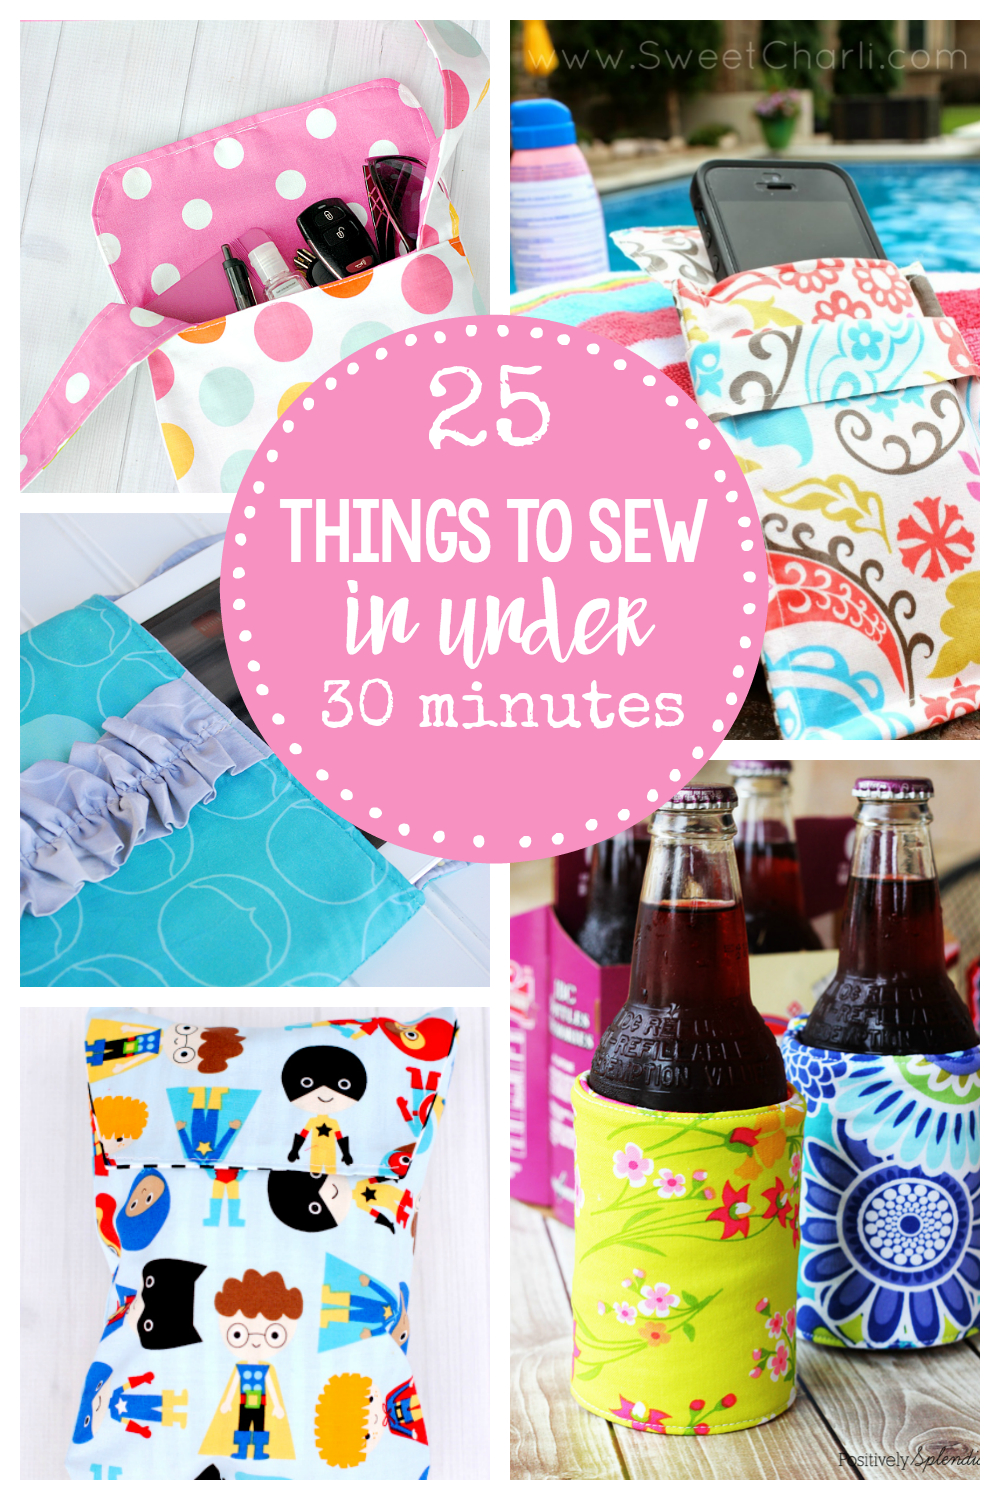 Easy Sew Patterns Easy Sewing Patterns 25 Things To Sew In Under 30 Minutes